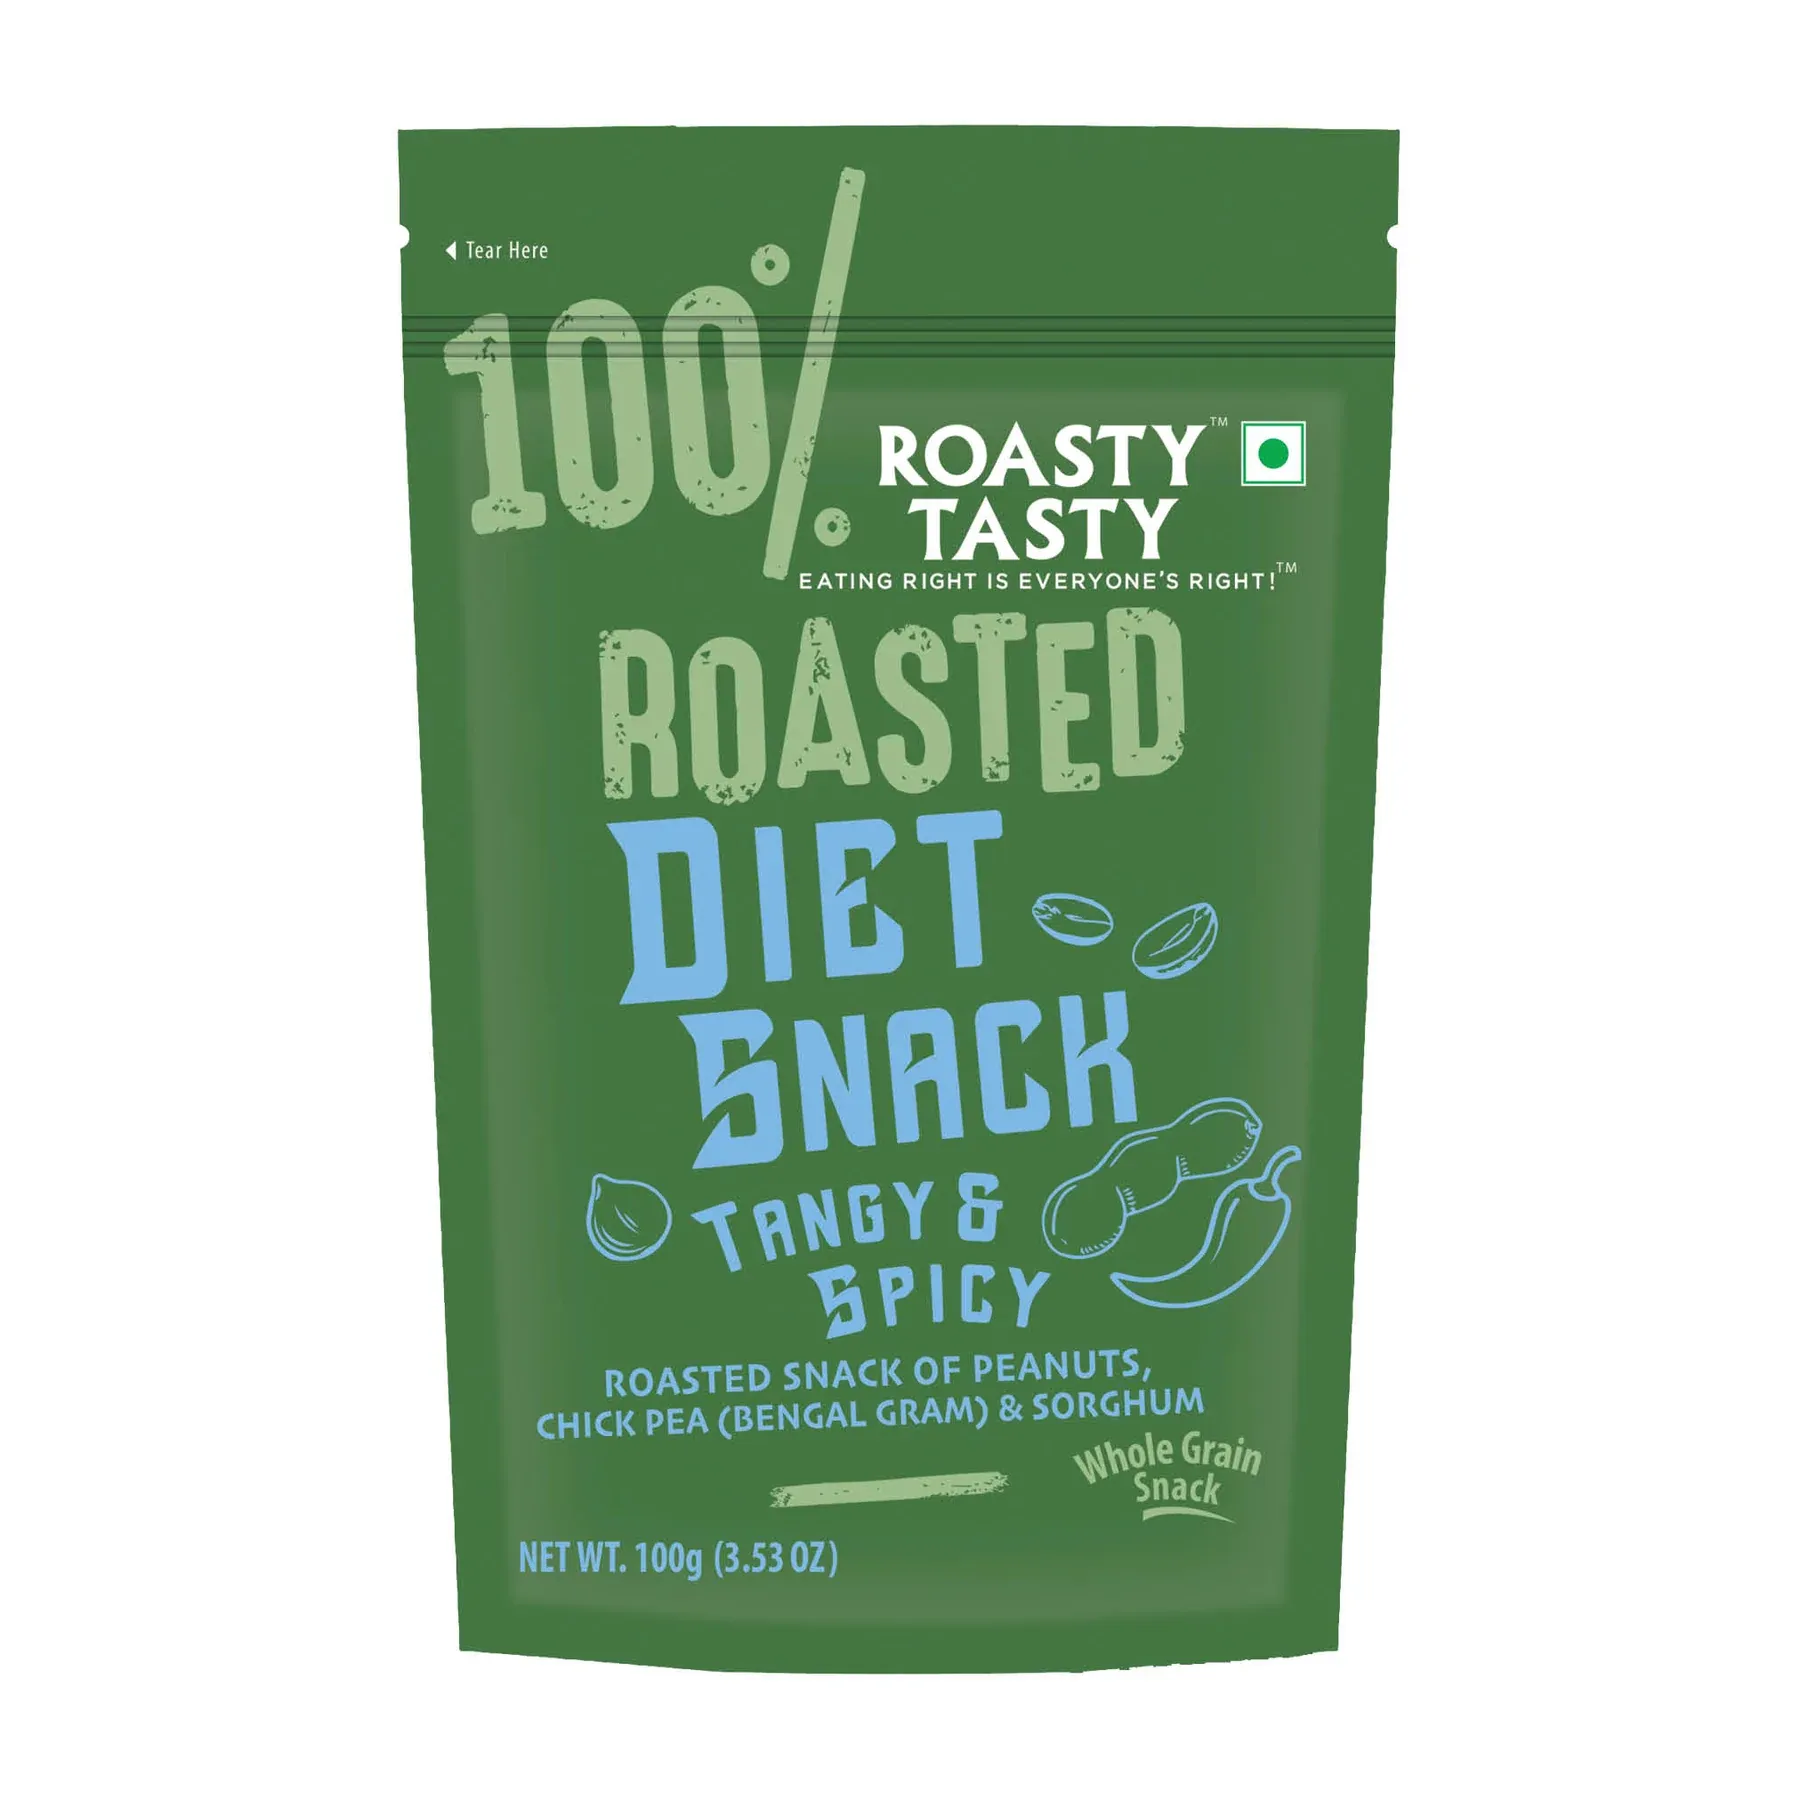 Roasty Tasty Diet Snack Tangy & Spicy  Image